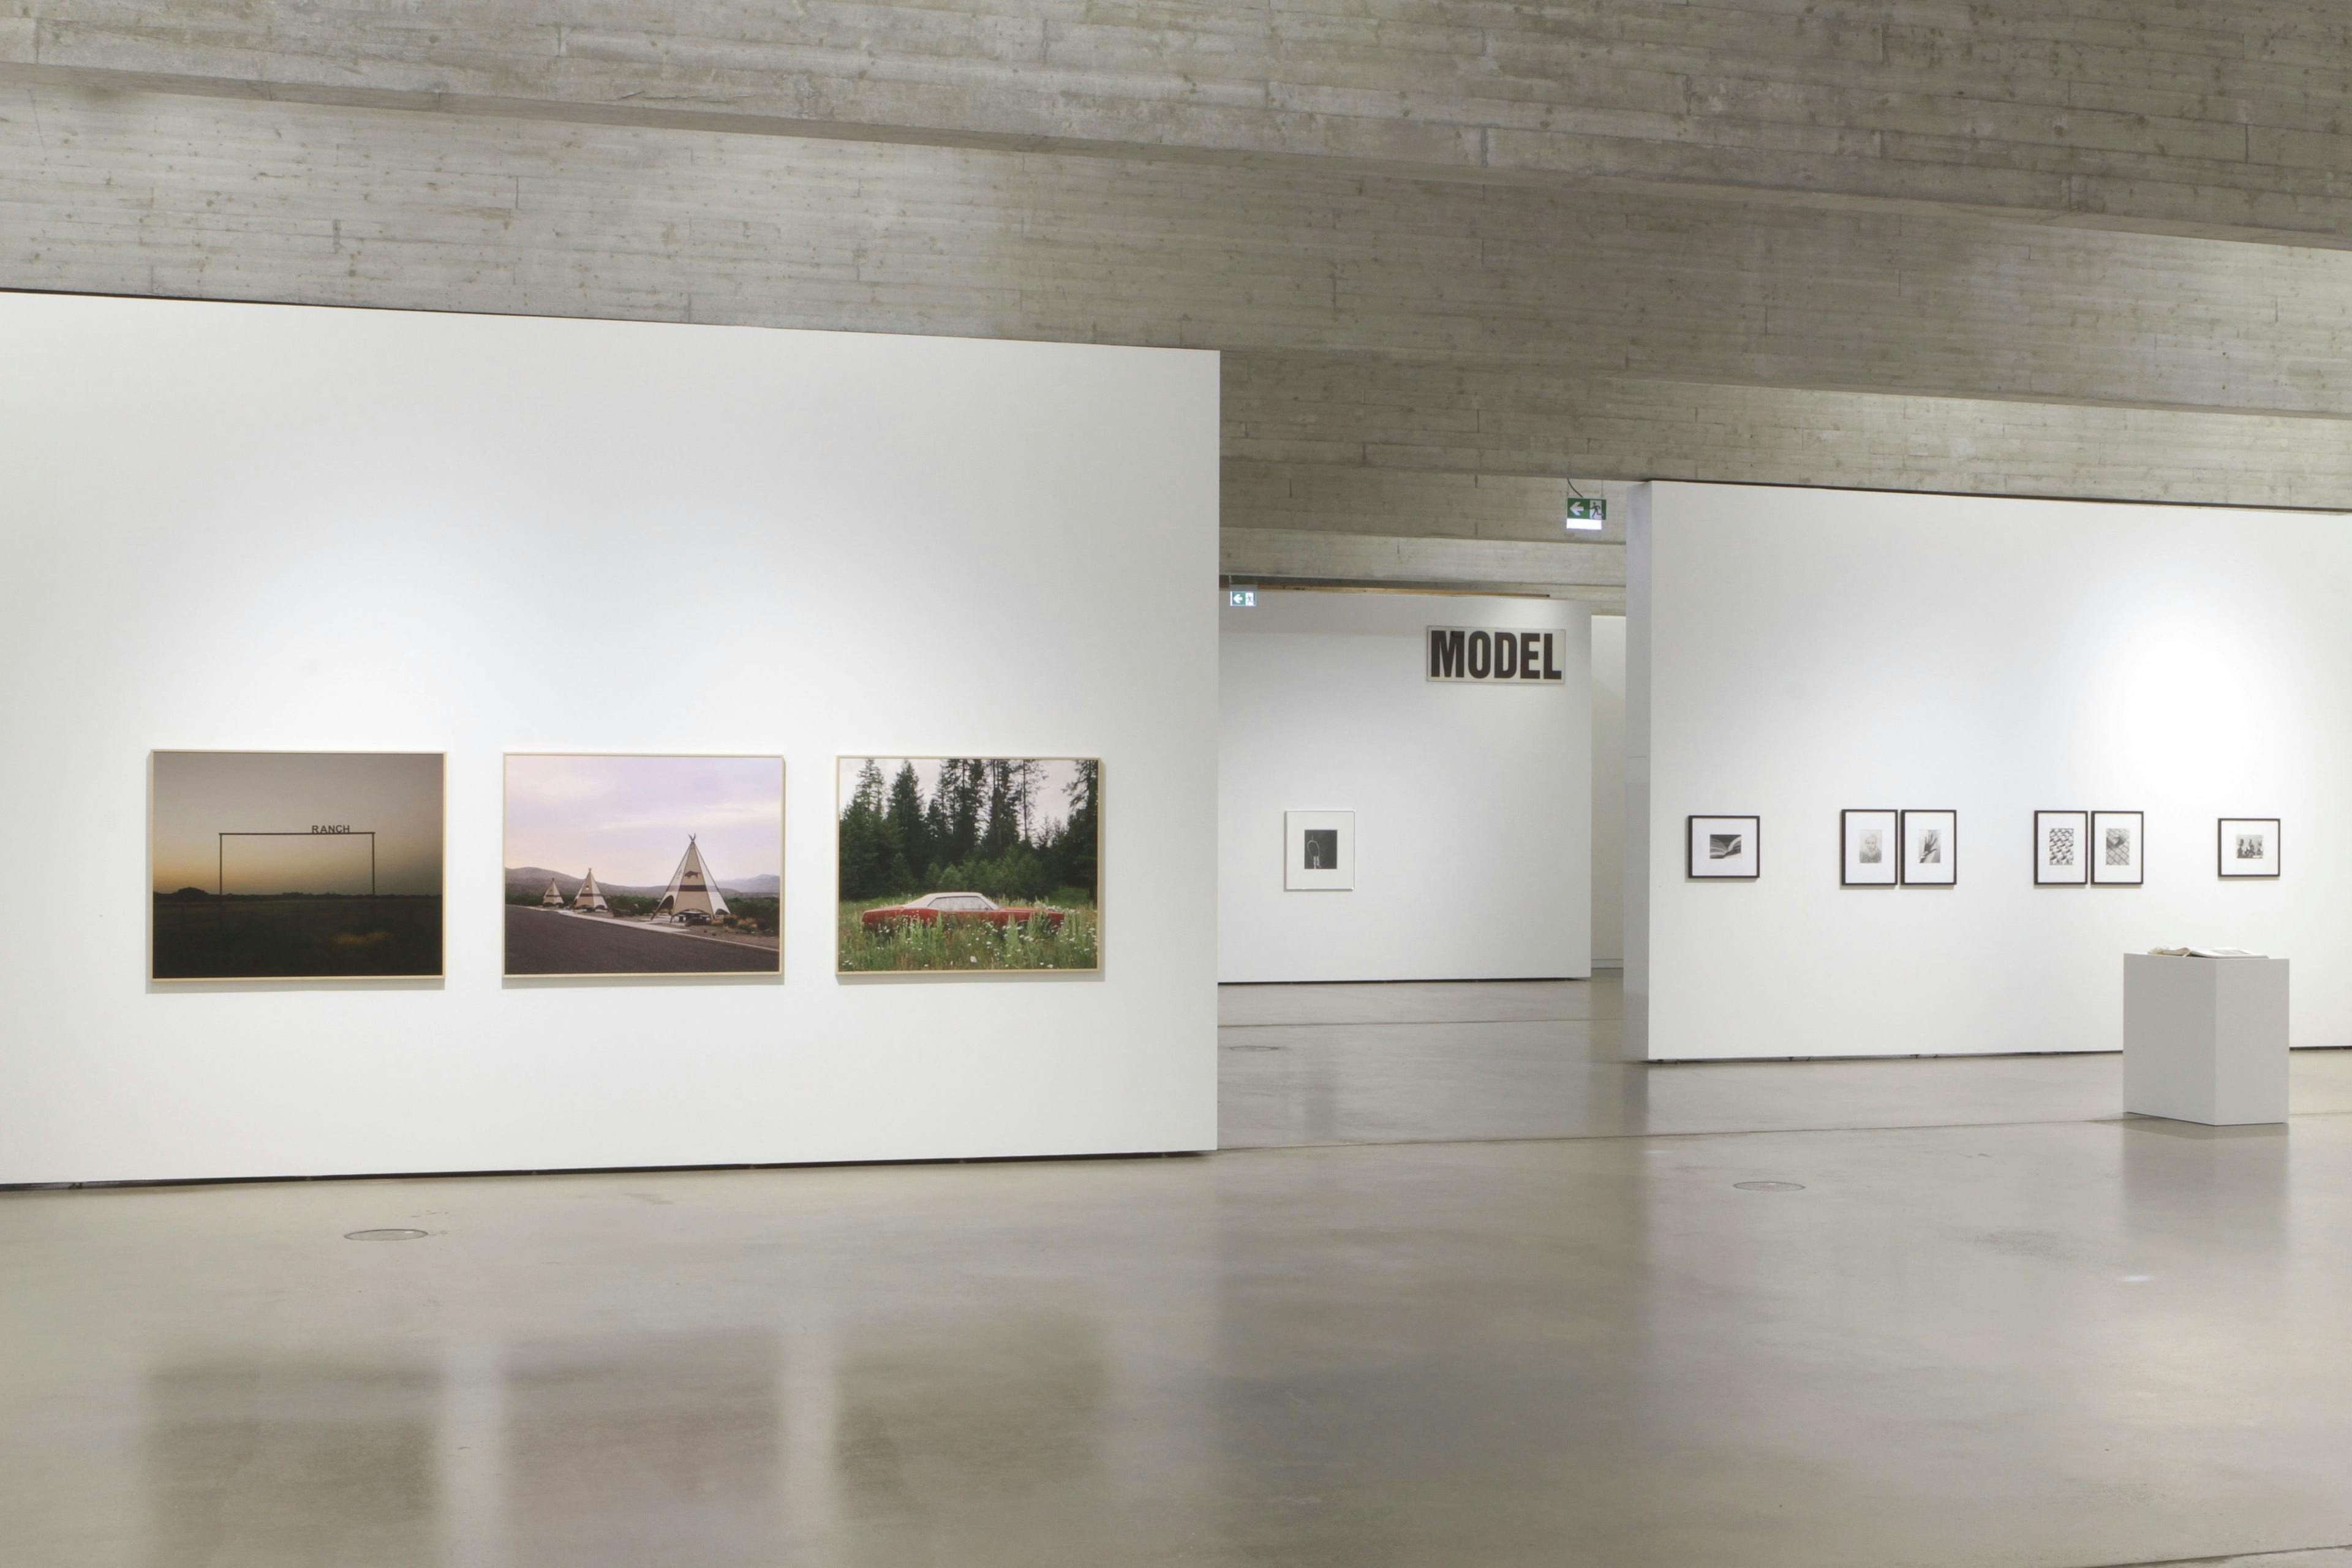 Installation view of the exhibition, Christopher Williams: Between Art and Commerse, at the Biennale für aktuelle Fotografie, dated 2020.